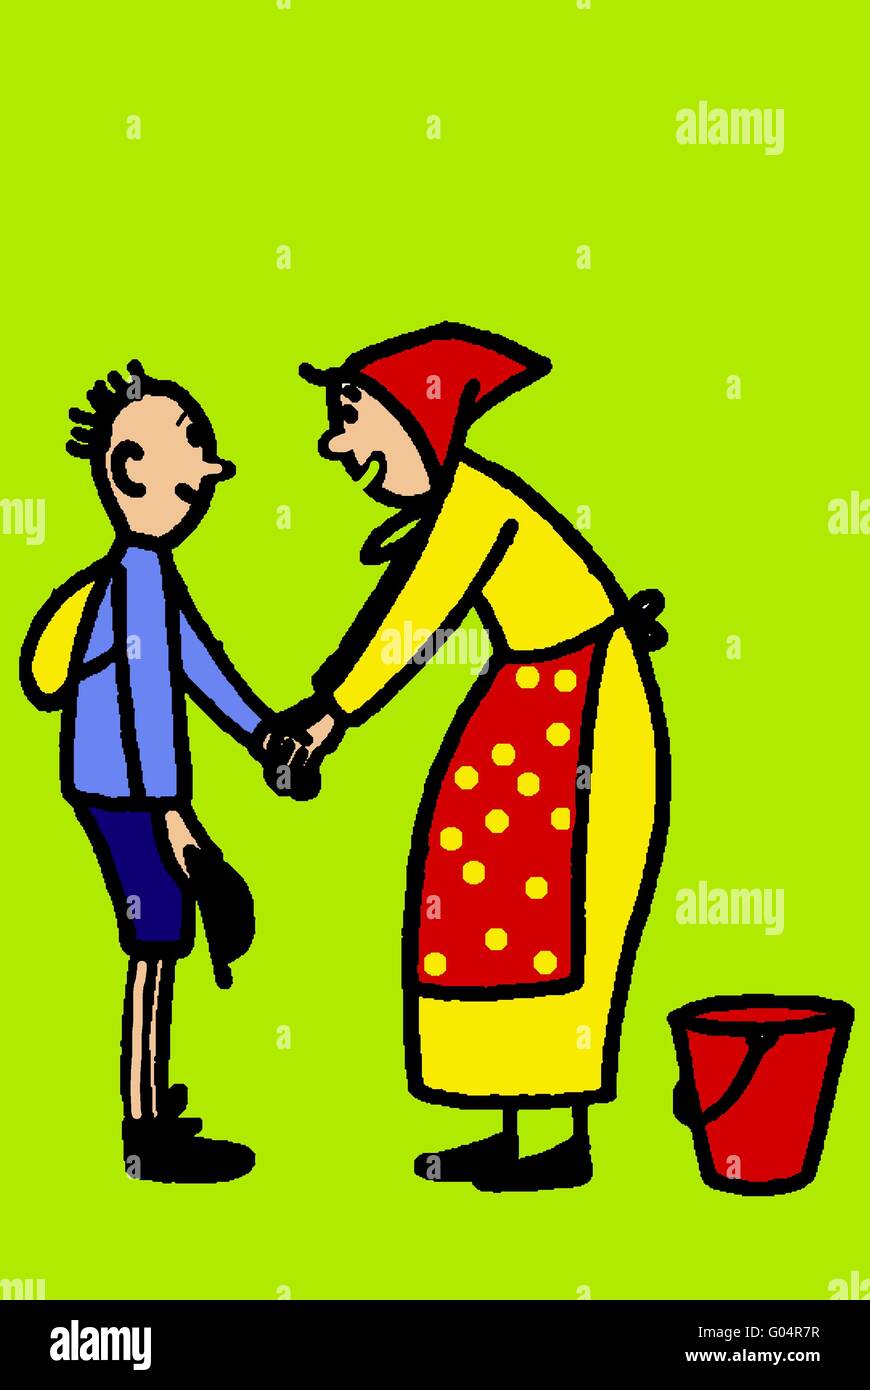 A country woman welcomes a boy Stock Photo